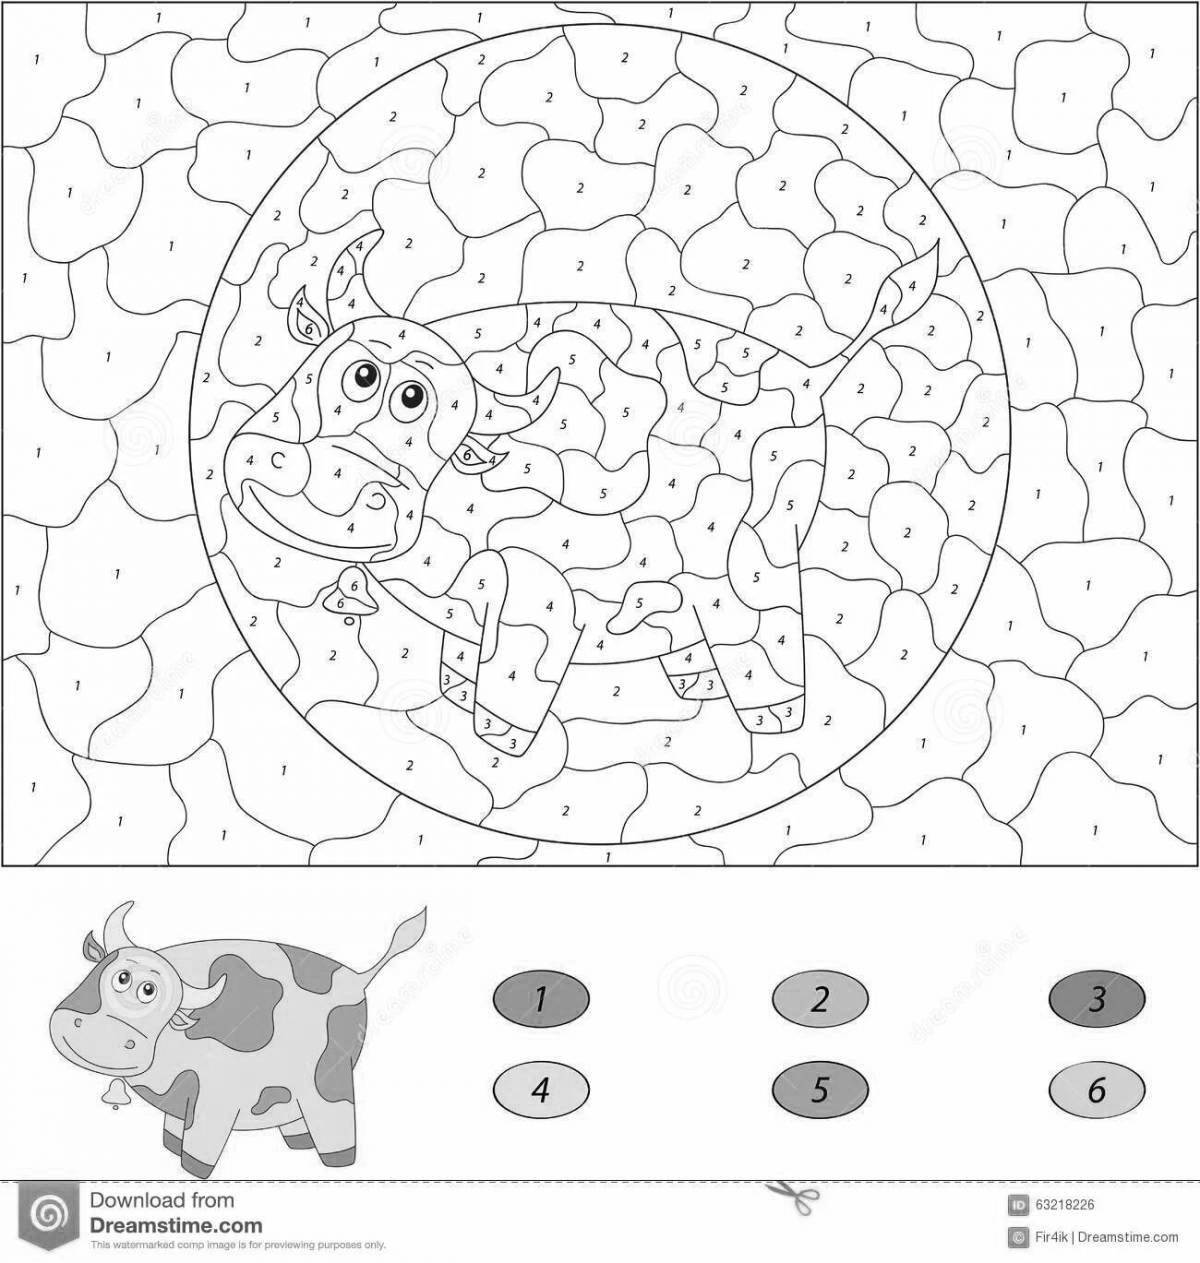 Colorful pet coloring page by number